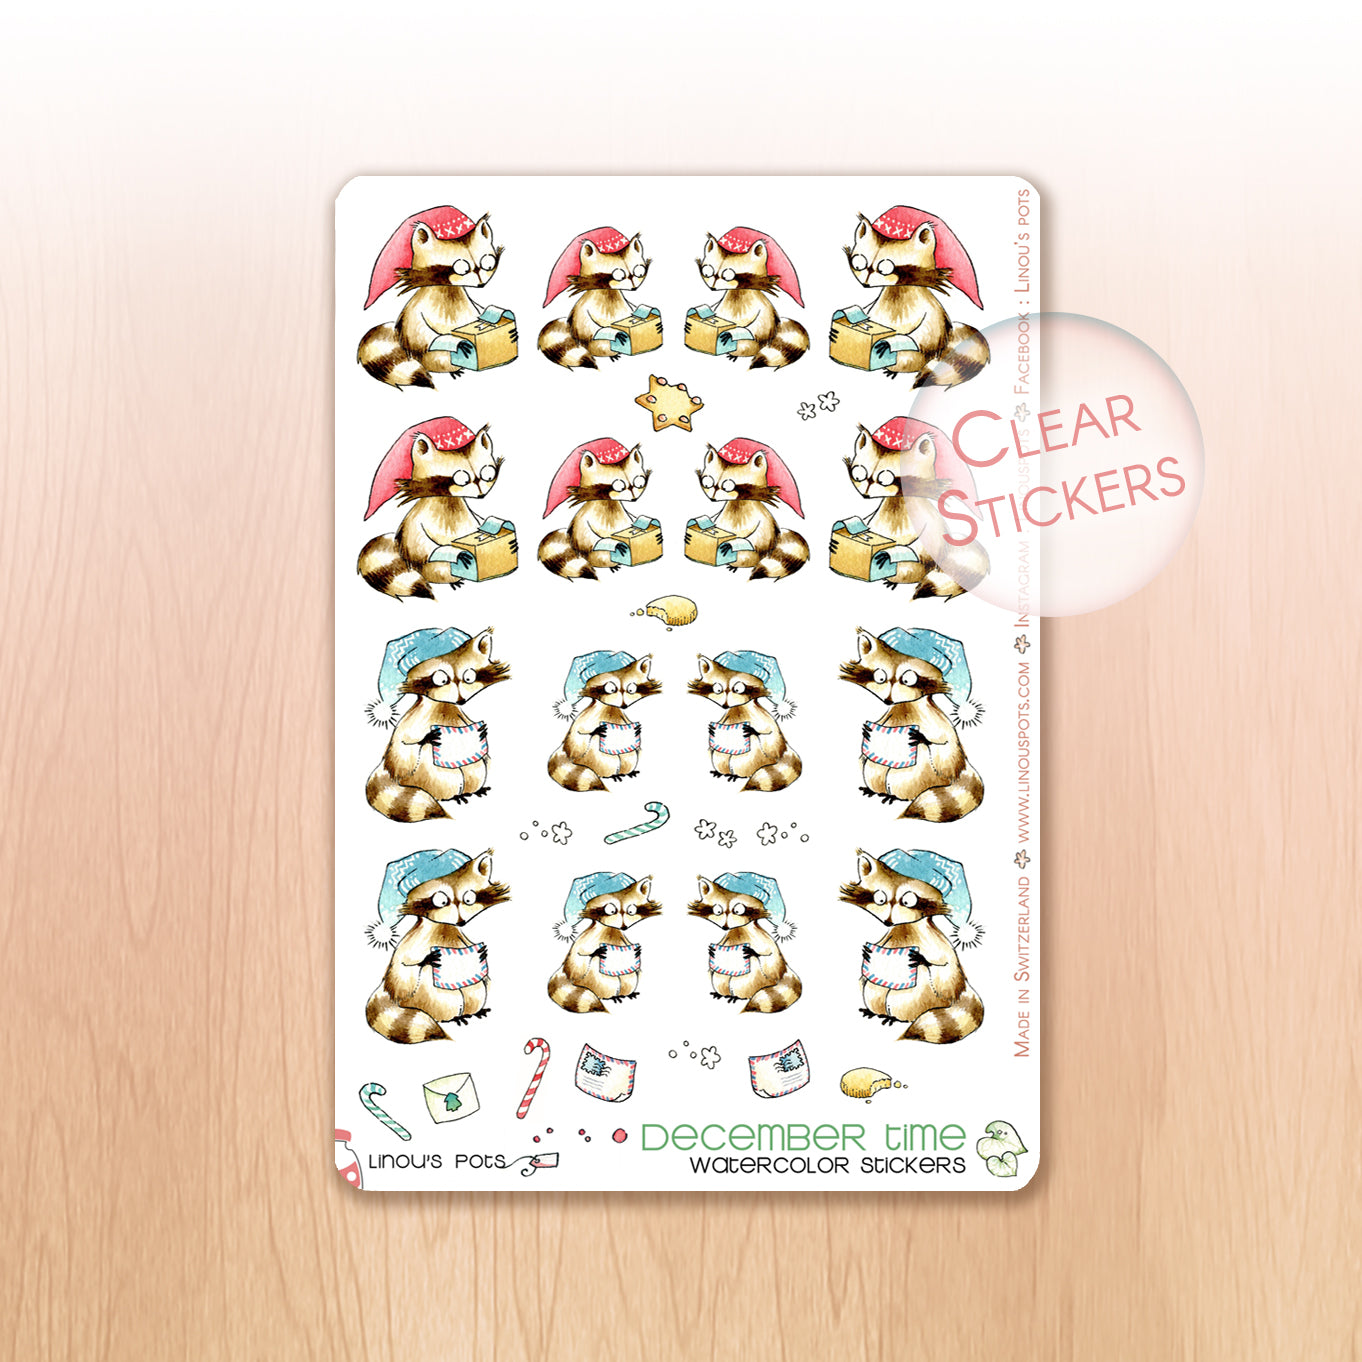 Christmas watercolor stickers with raccoons